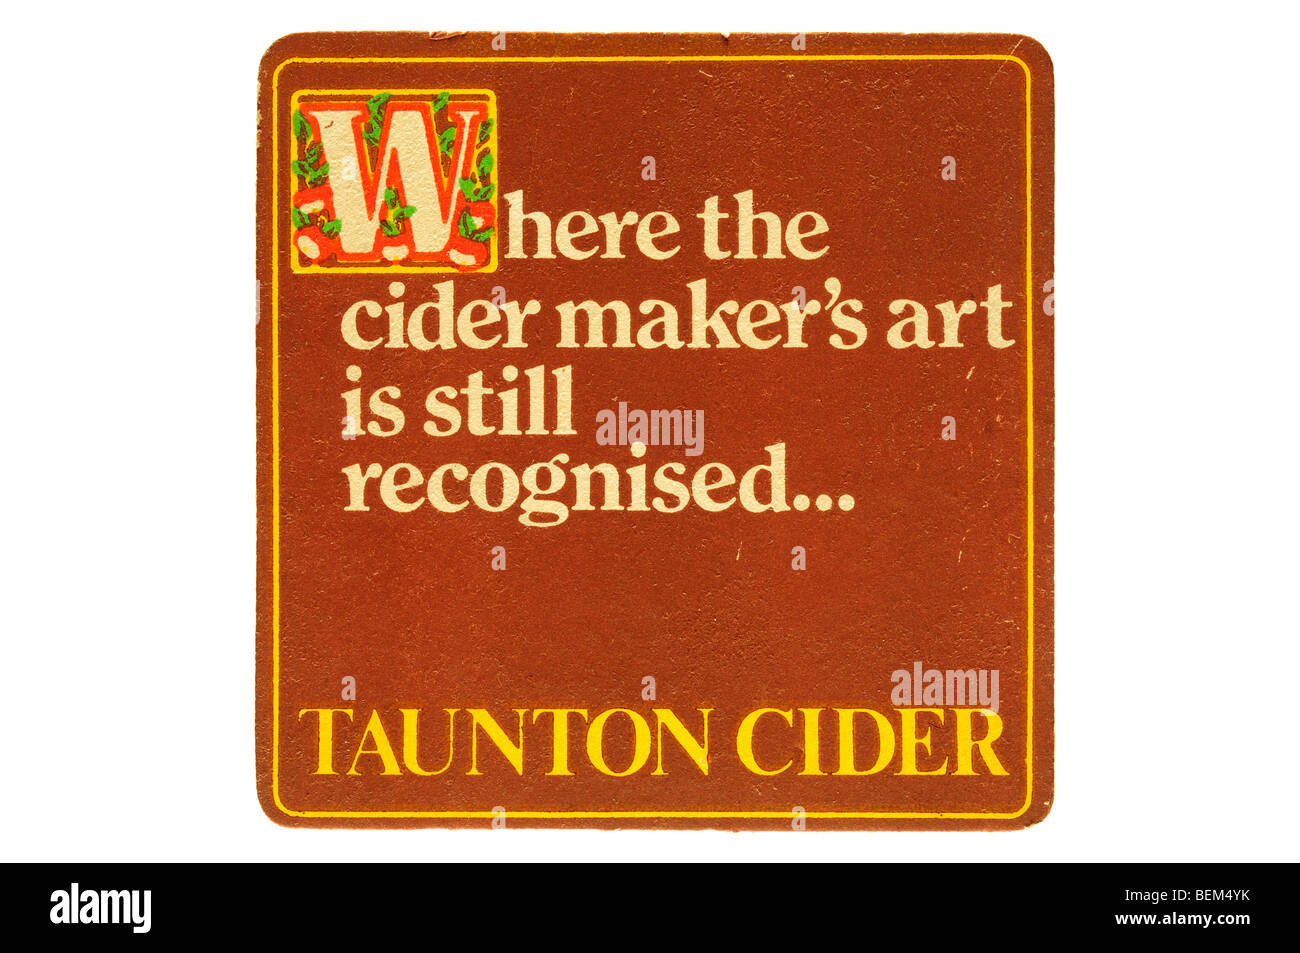 where the cider makers art is still recognised taunten cider Stock Photo